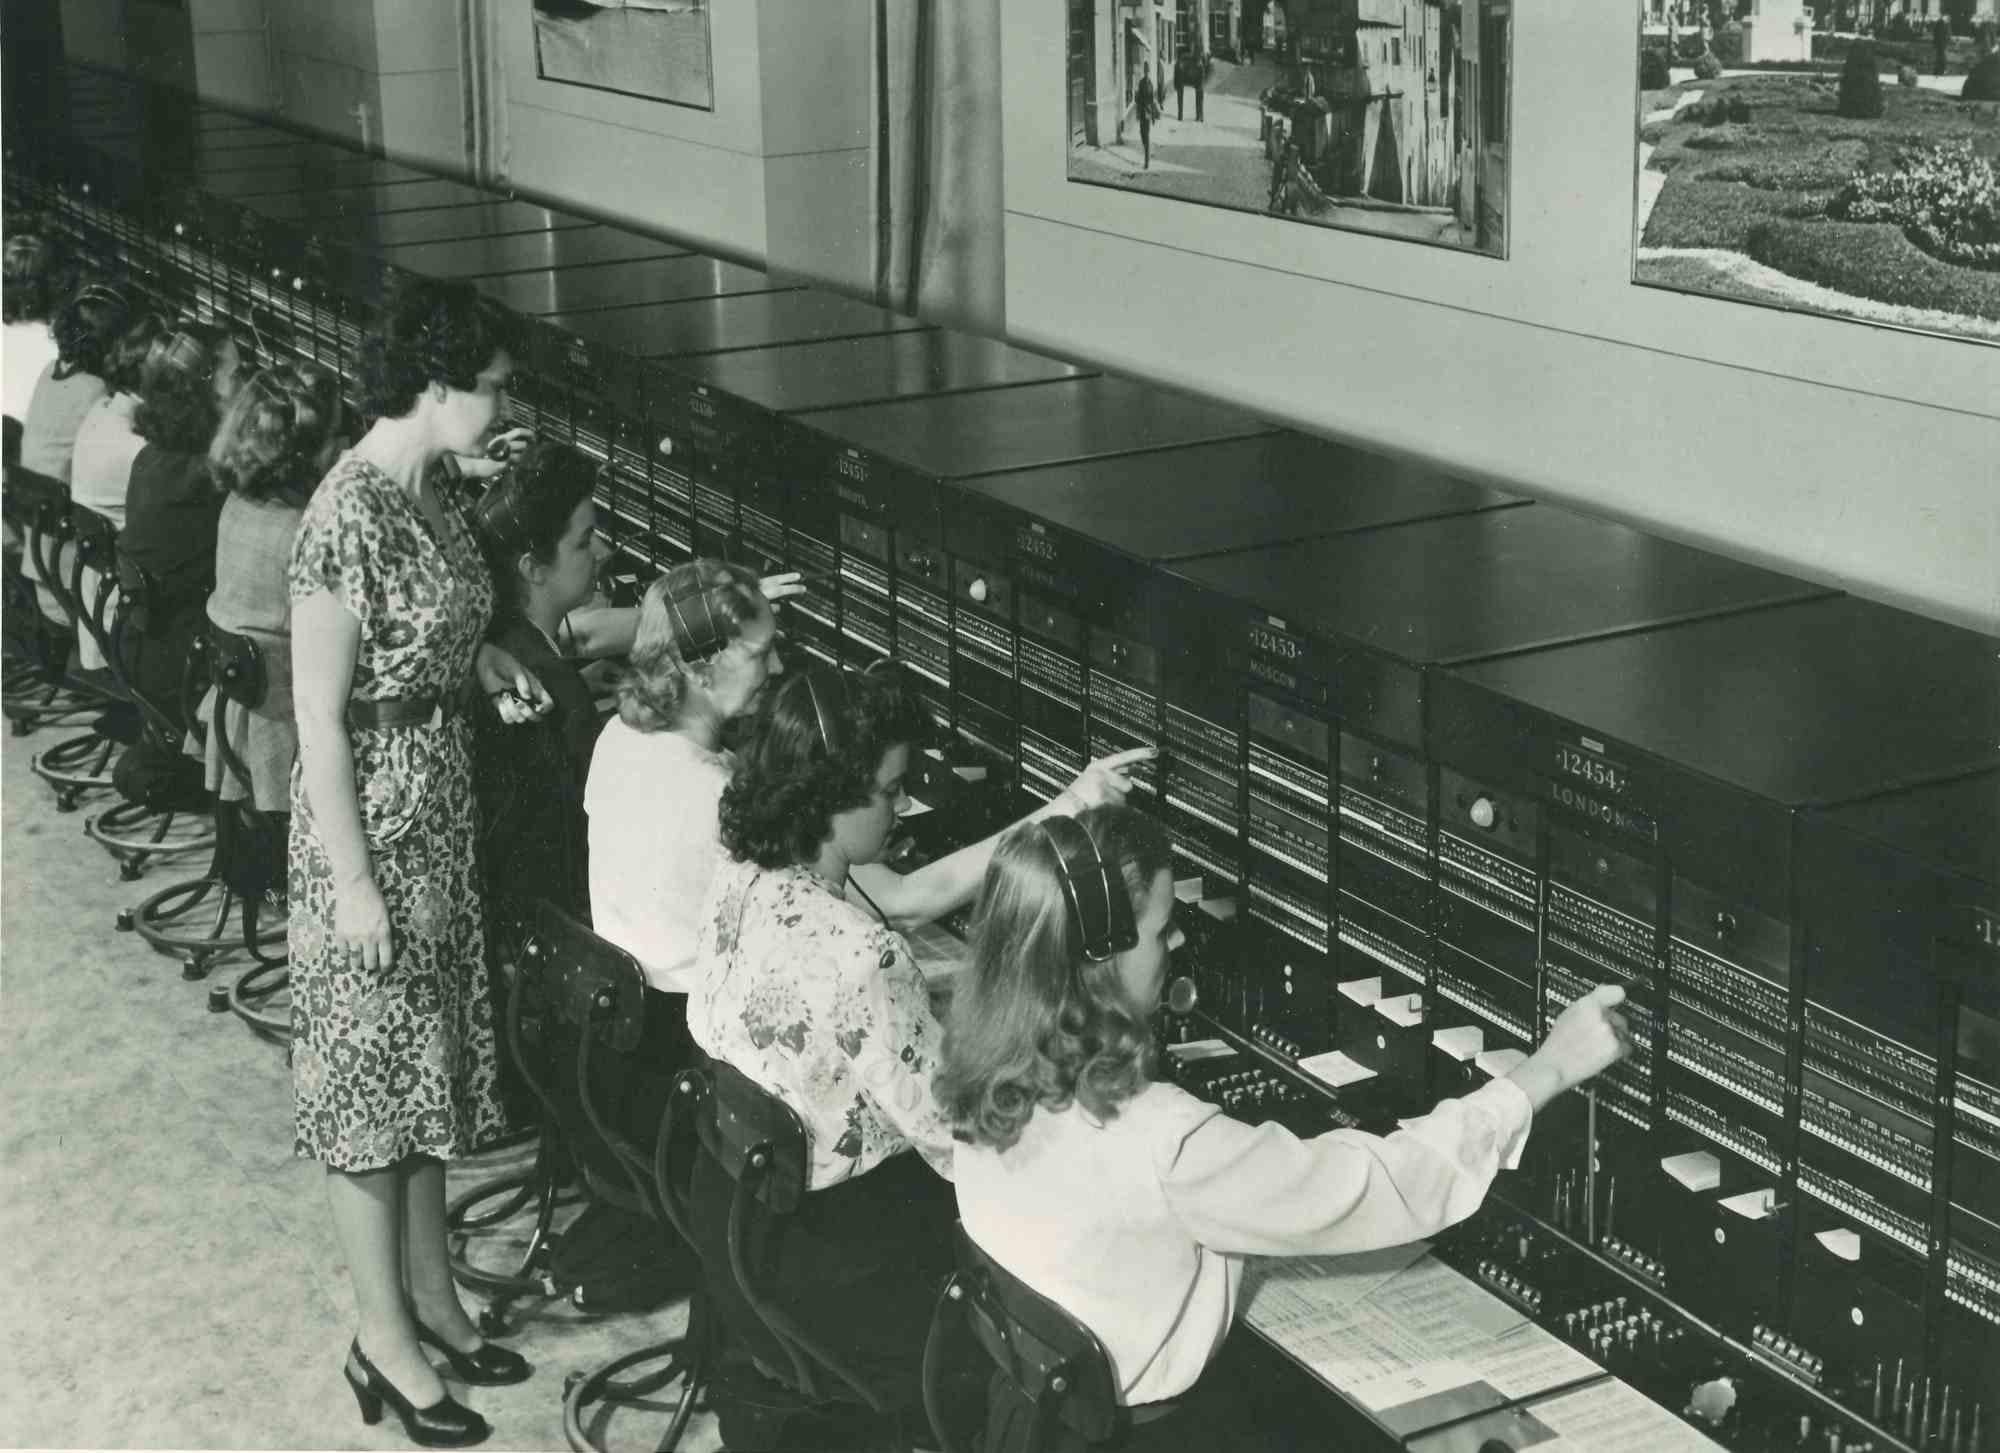 Unknown Figurative Photograph - Telephone System -  American Vintage Photograph - Mid 20th Century